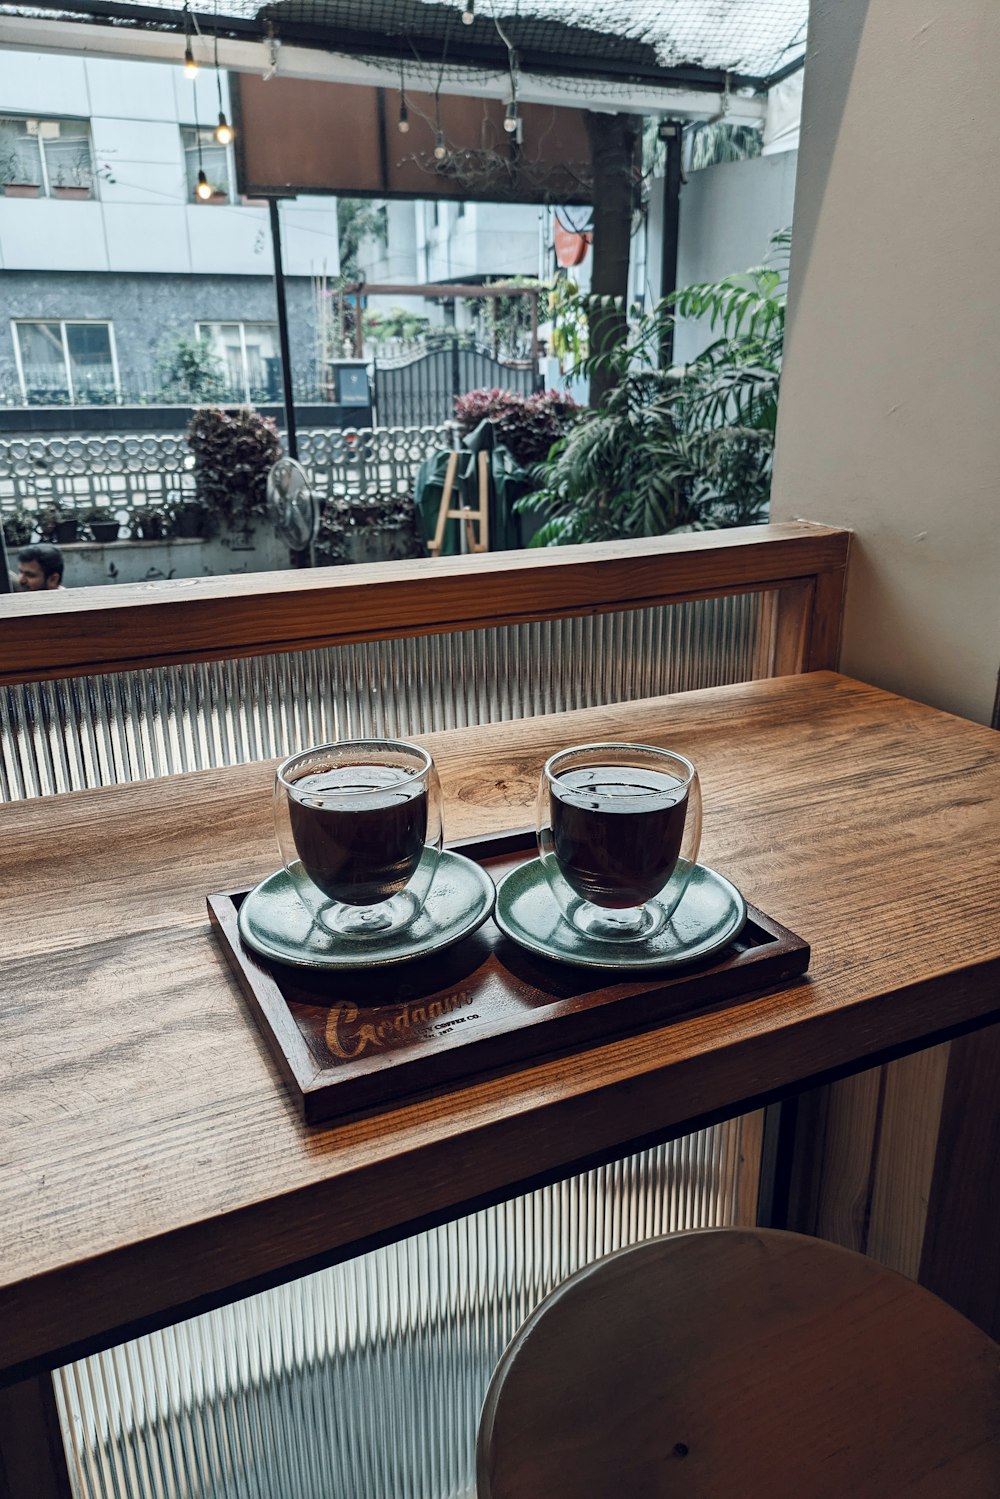 two cups of coffee sit on a tray in front of a window